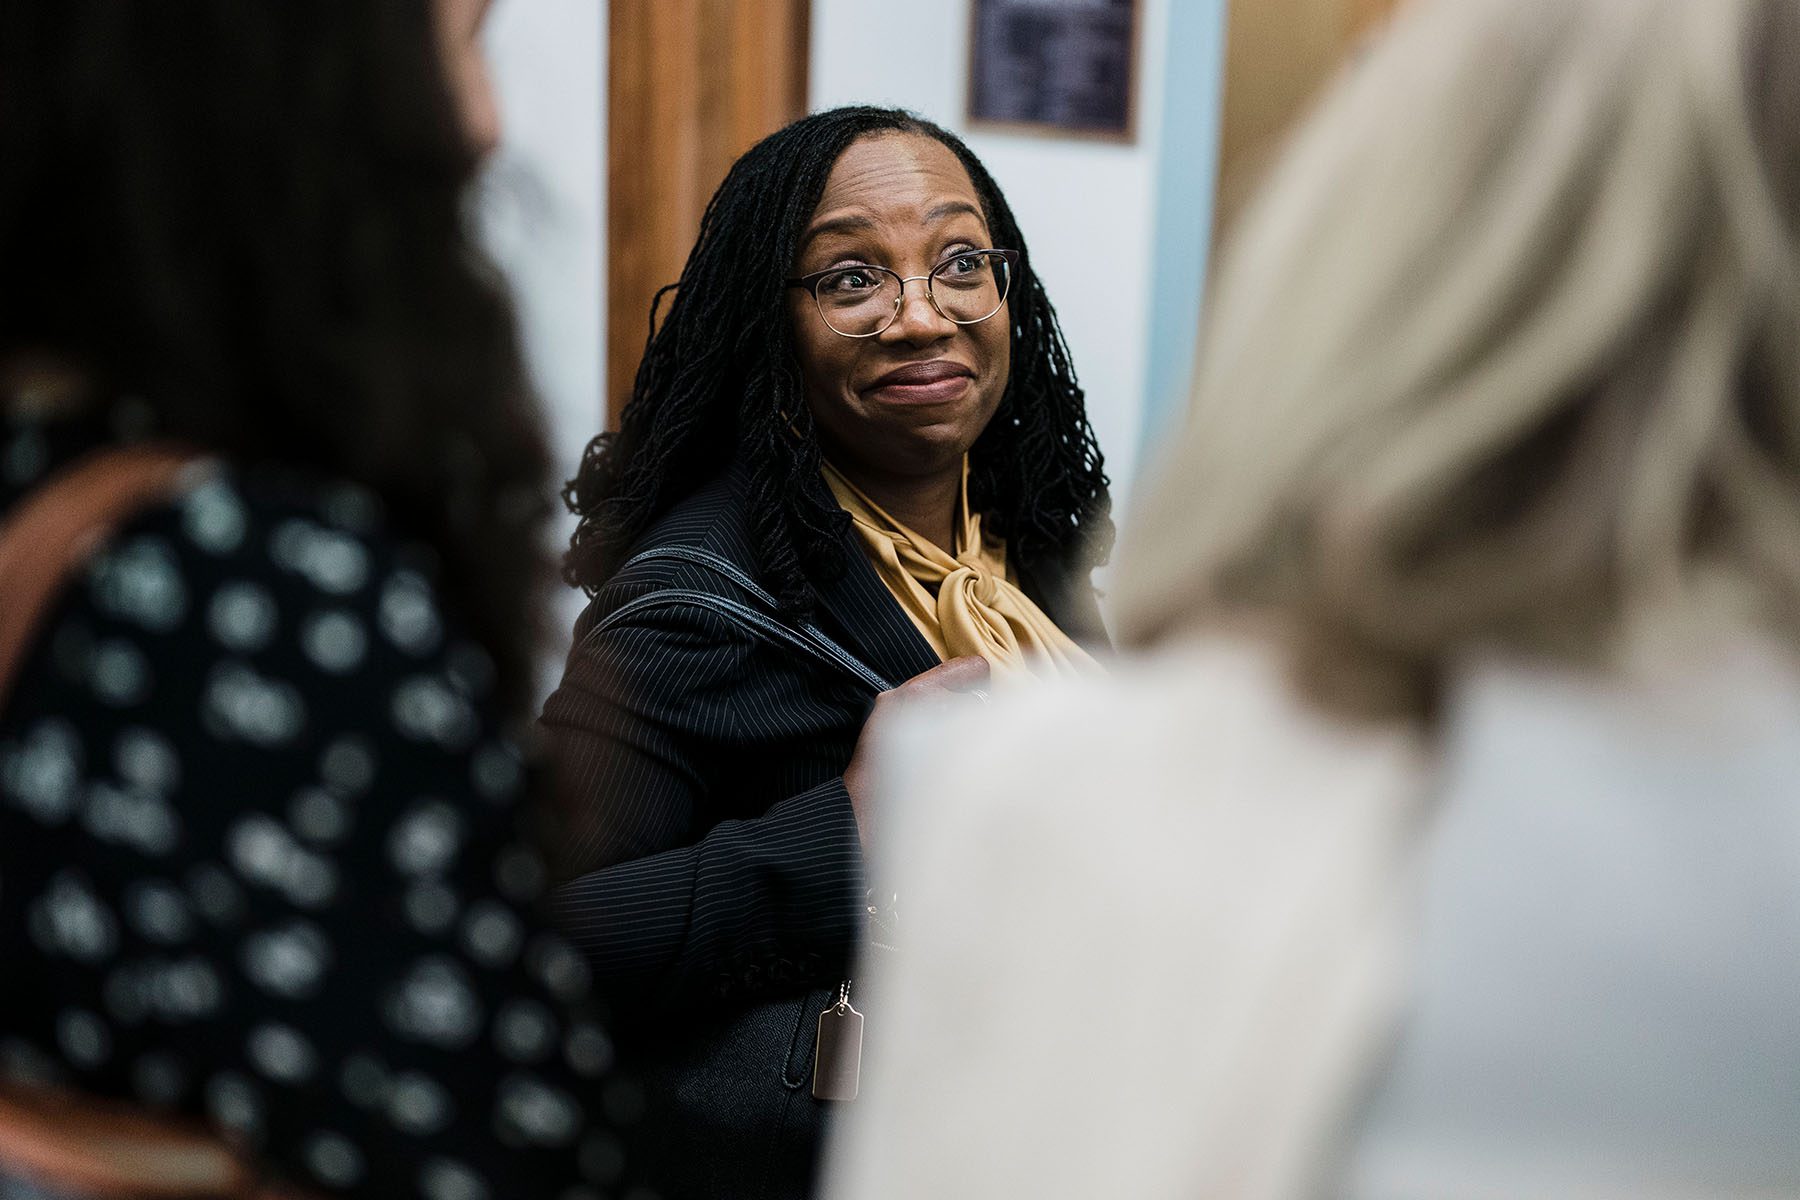 Judge Ketanji Brown Jackson speaks to people during a visit to Capitol Hill.